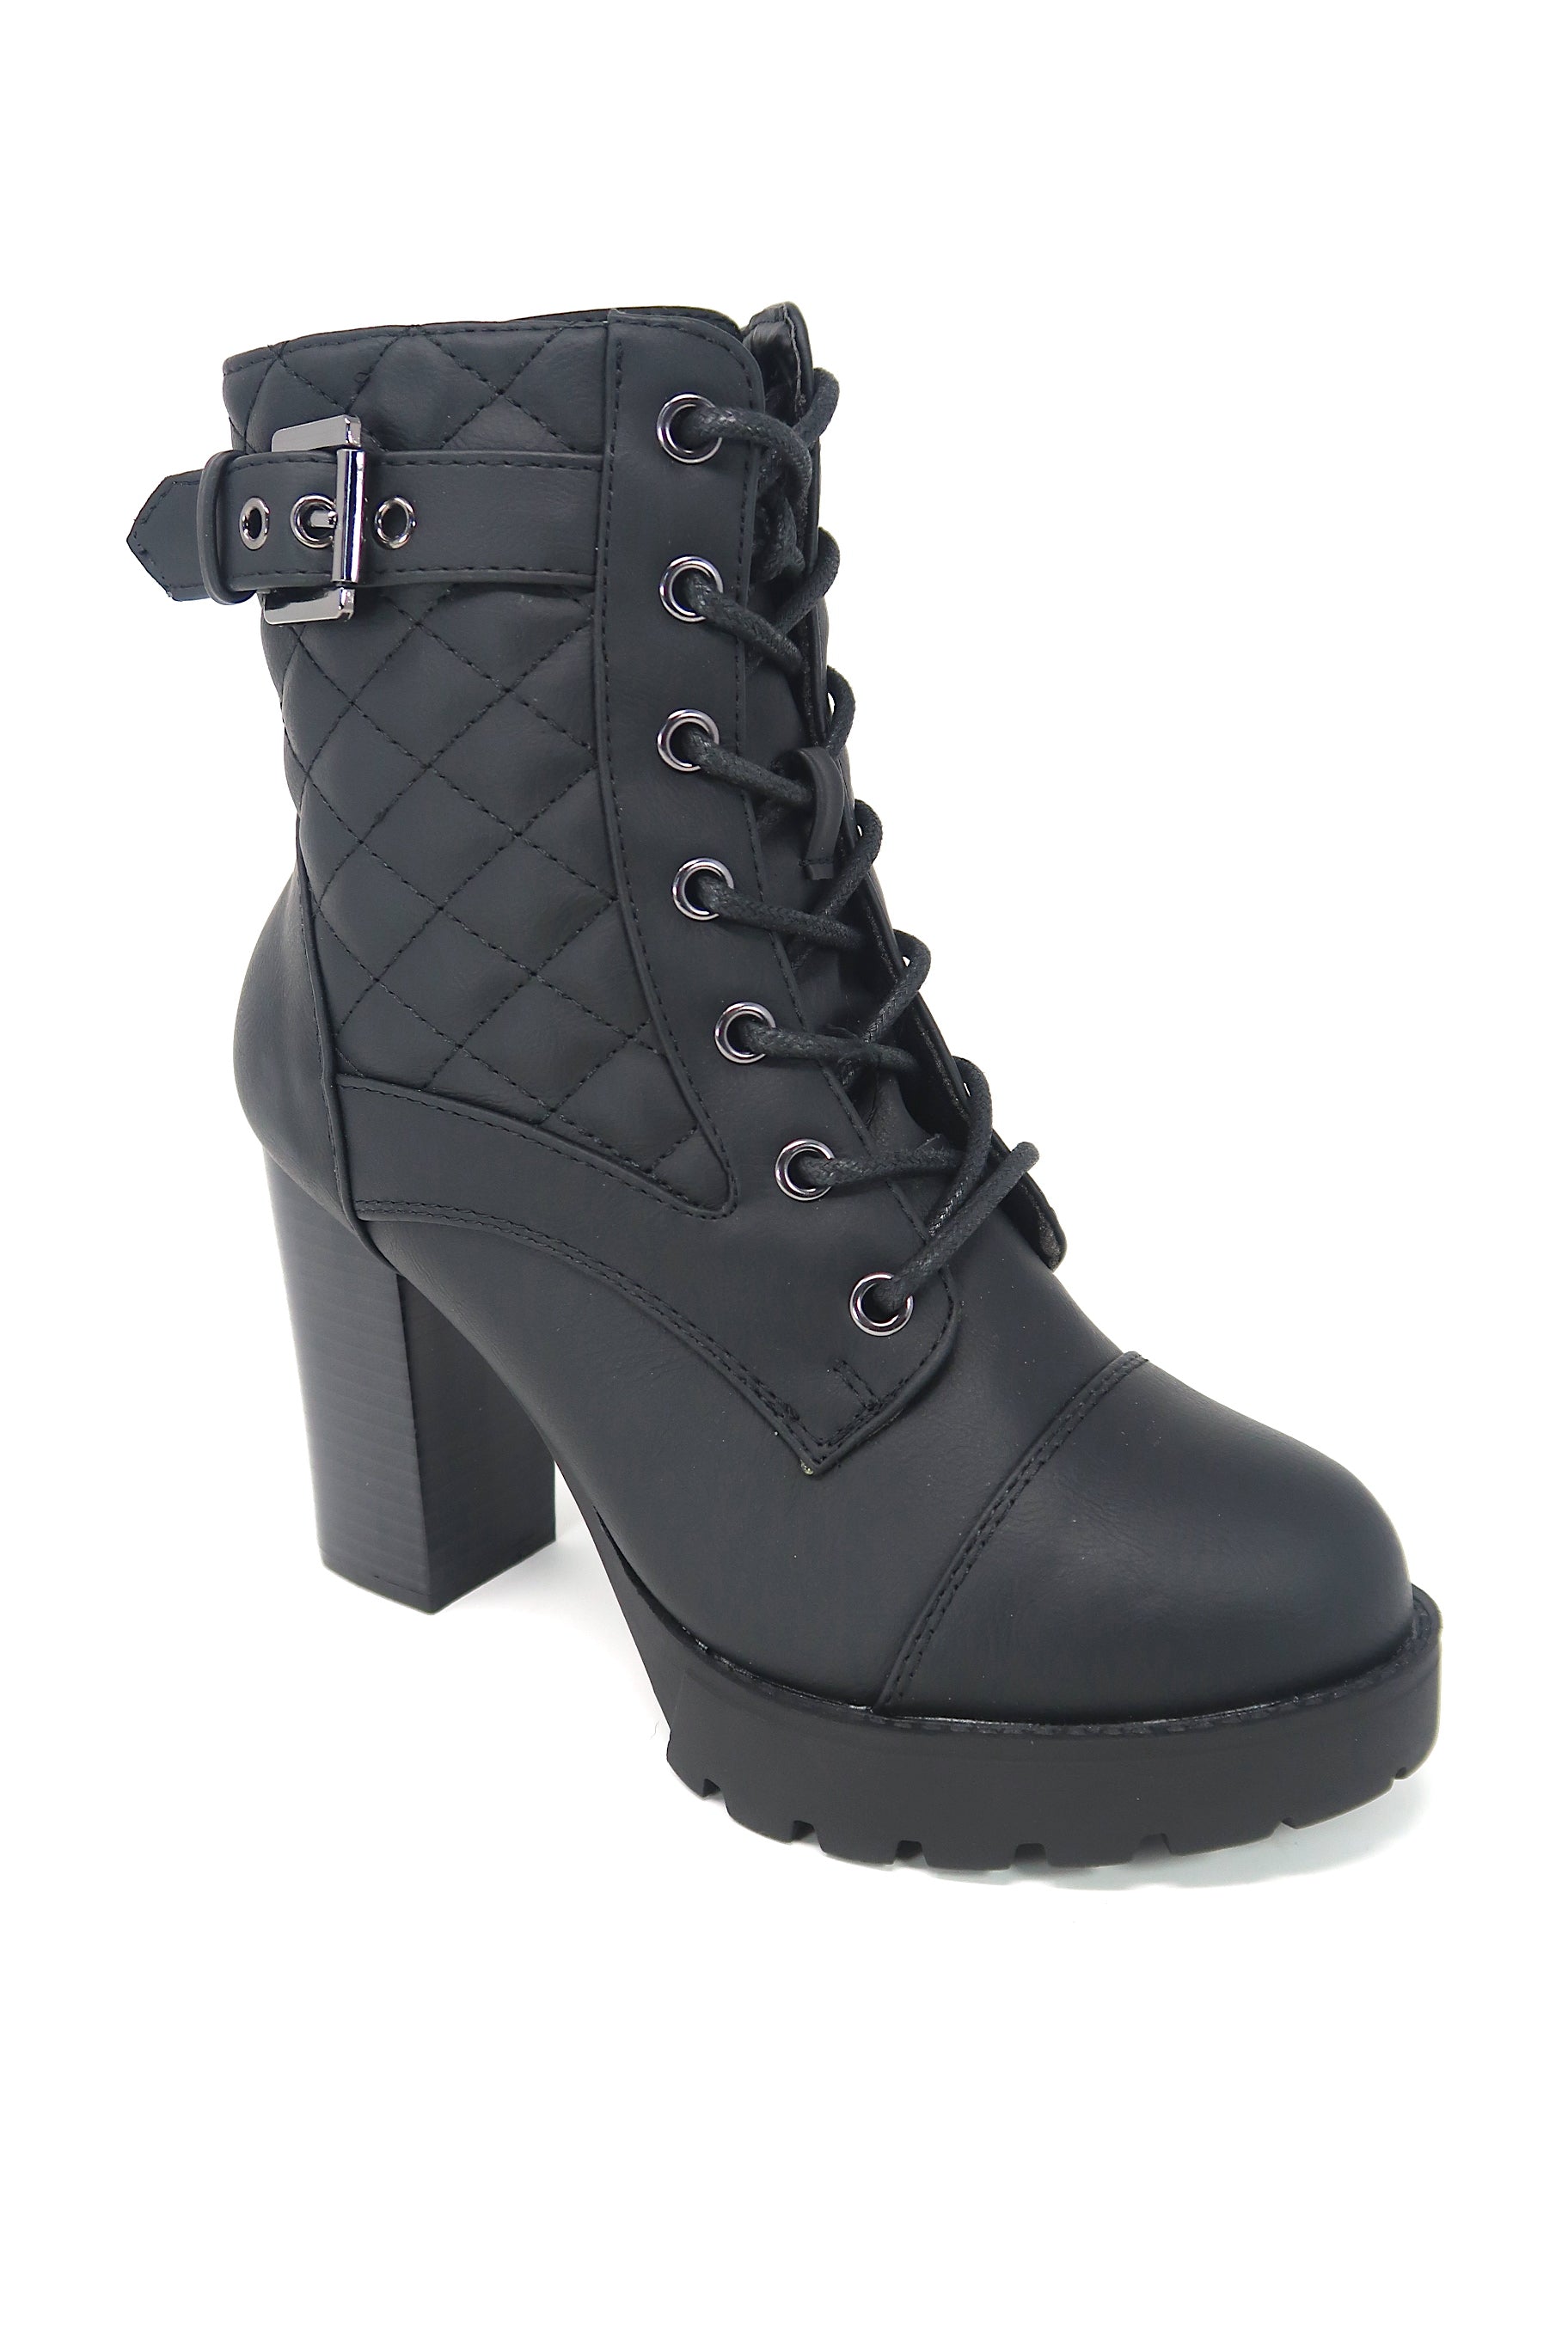 Vikky - Strappy Mesh Cutout Lace Up Ankle Booties (Street Sole